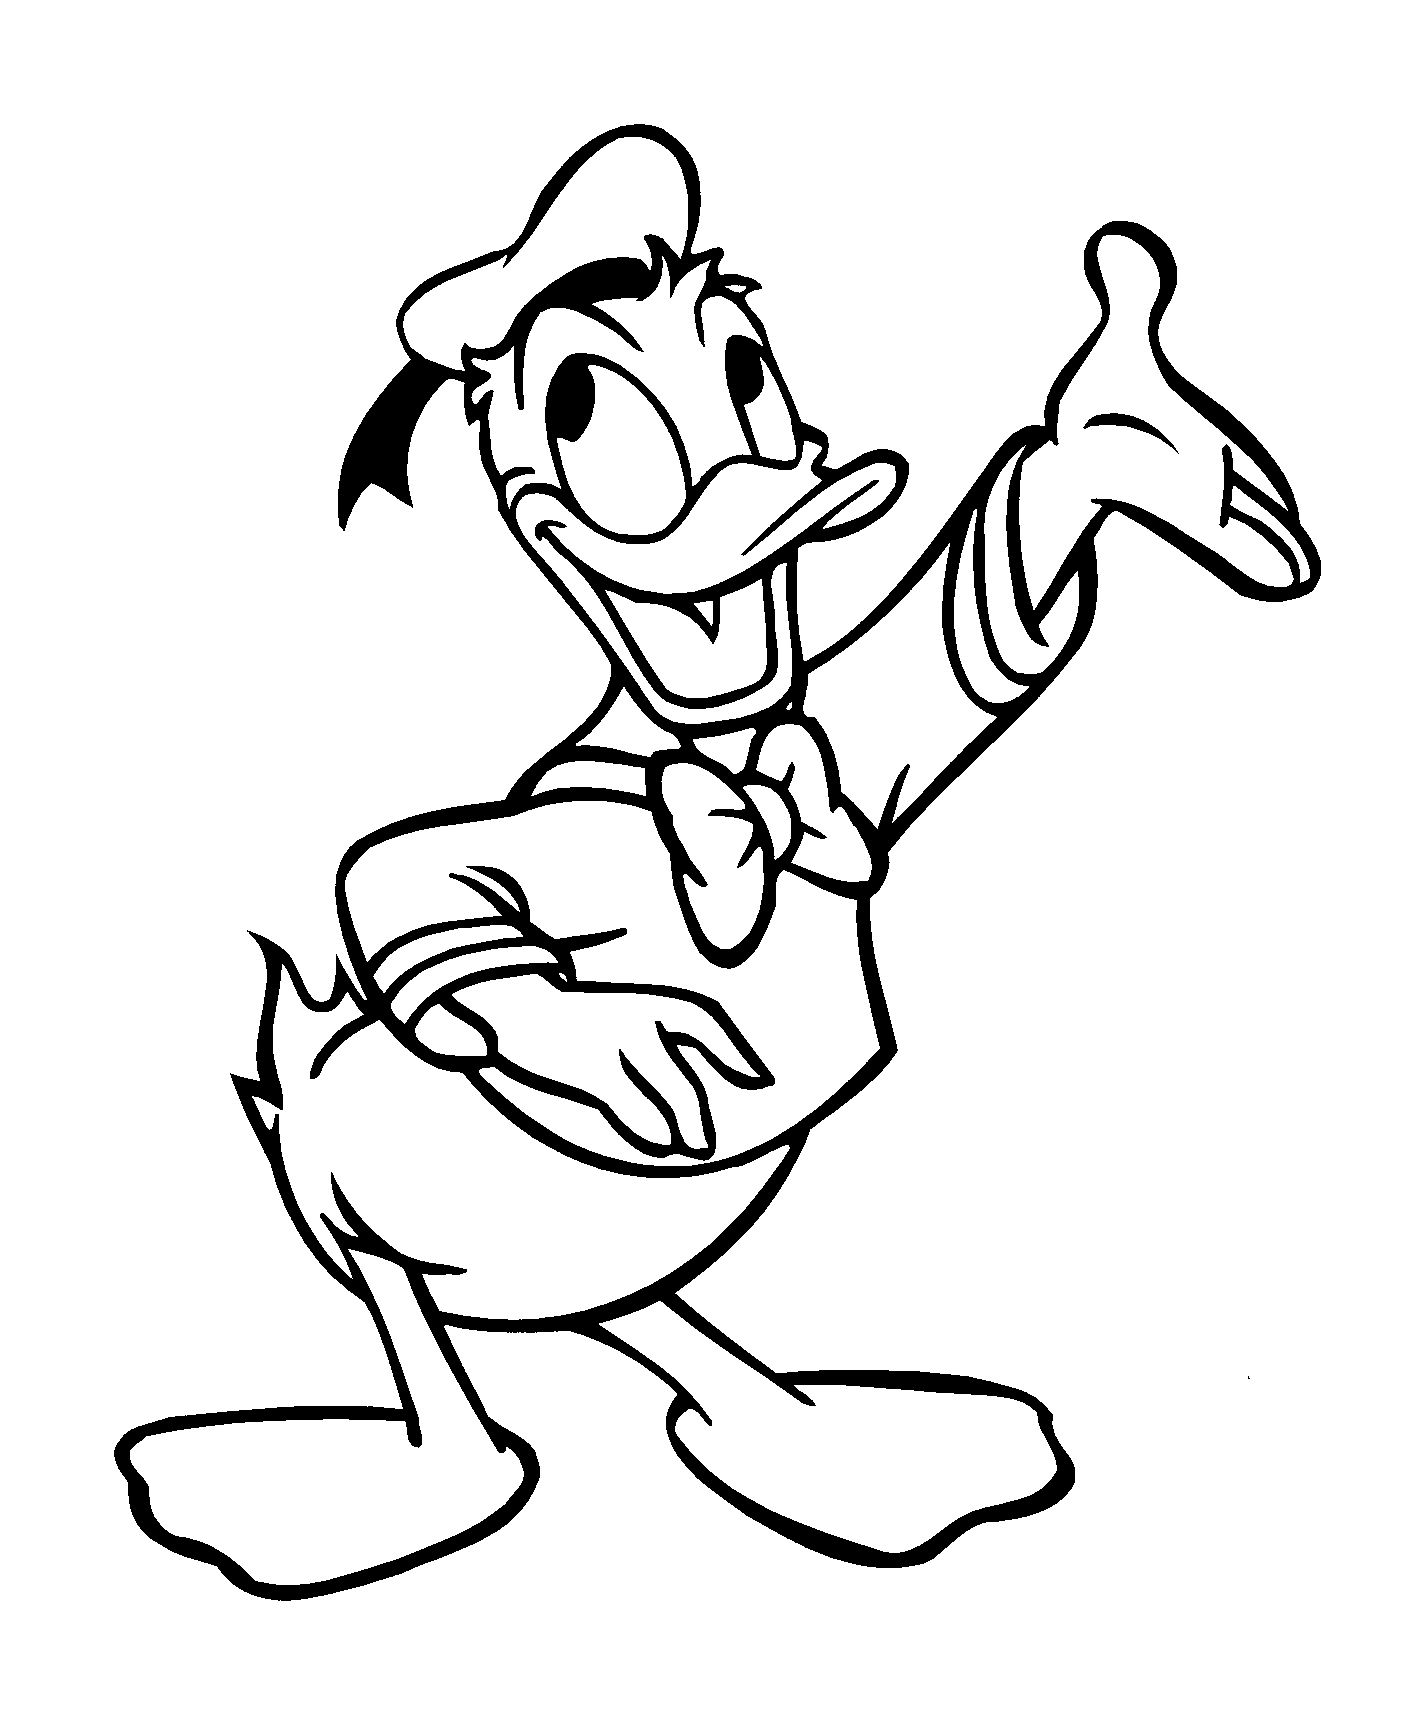 Drawings Donald Duck (Cartoons) – Printable coloring pages